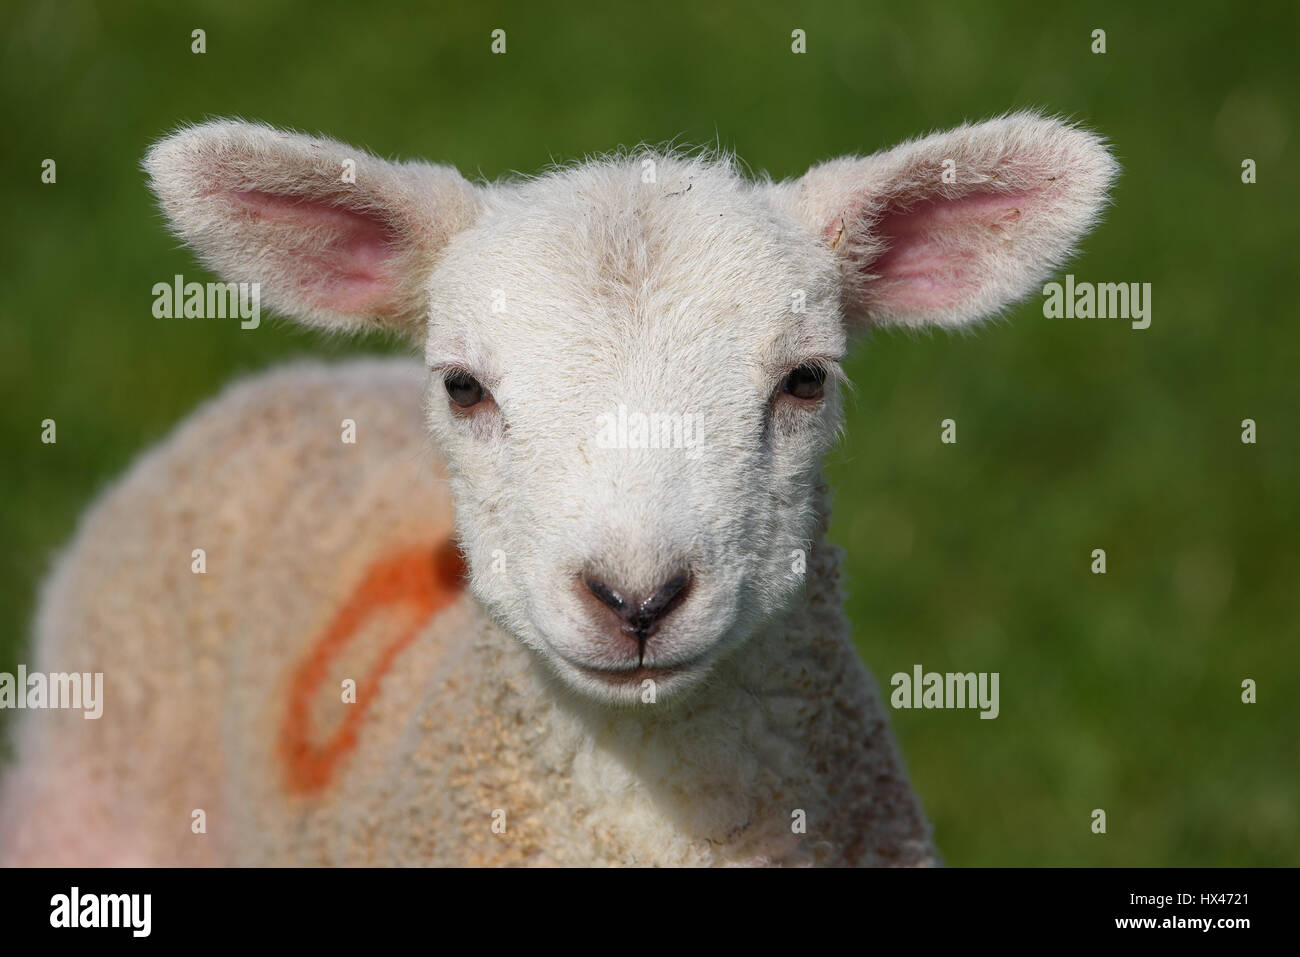 Chipping, Preston, Lancashire, UK. 24th March 2017. A lamb at the start of this year's lambing at Saddle End Farm, Chipping, Preston, Lancashire. Credit: John Eveson/Alamy Live News Stock Photo